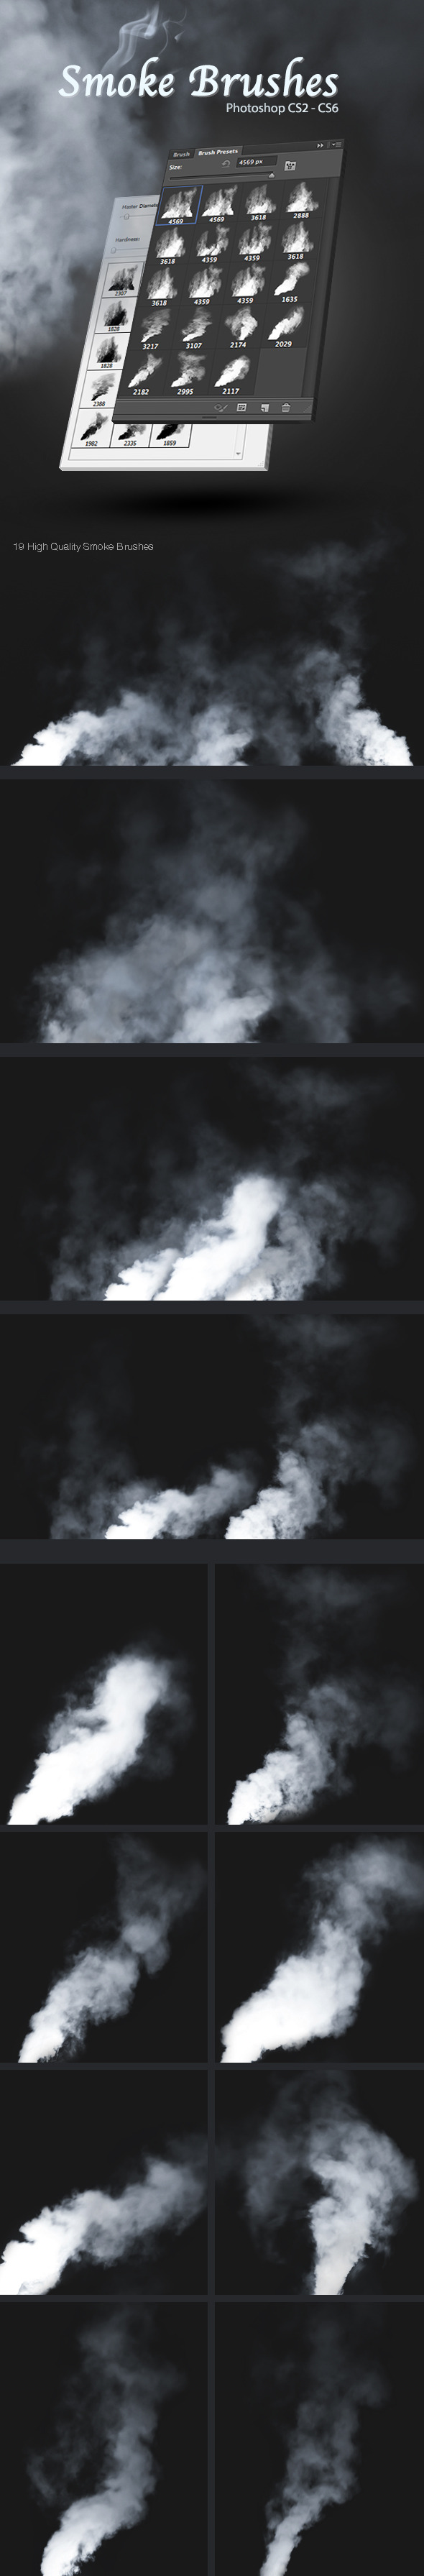 smoke brushes for photoshop cs6 free download